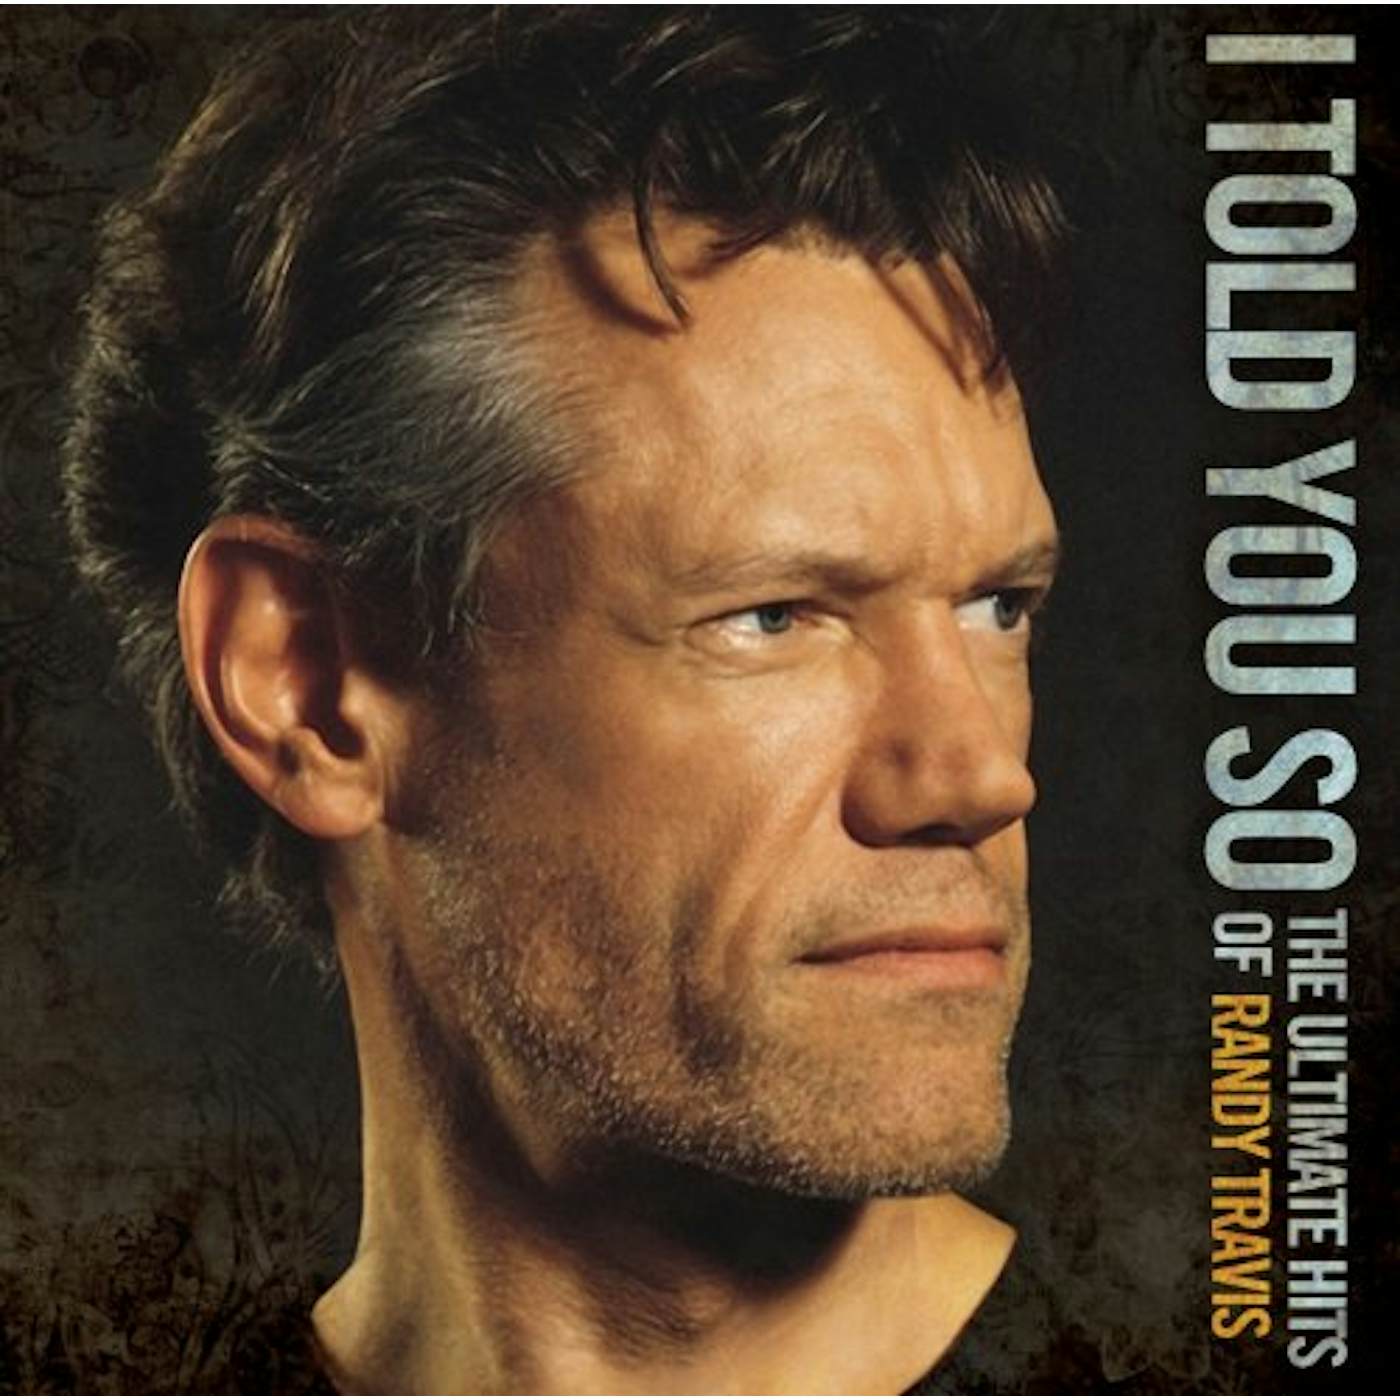 I TOLD YOU SO: THE ULTIMATE HITS OF RANDY TRAVIS CD